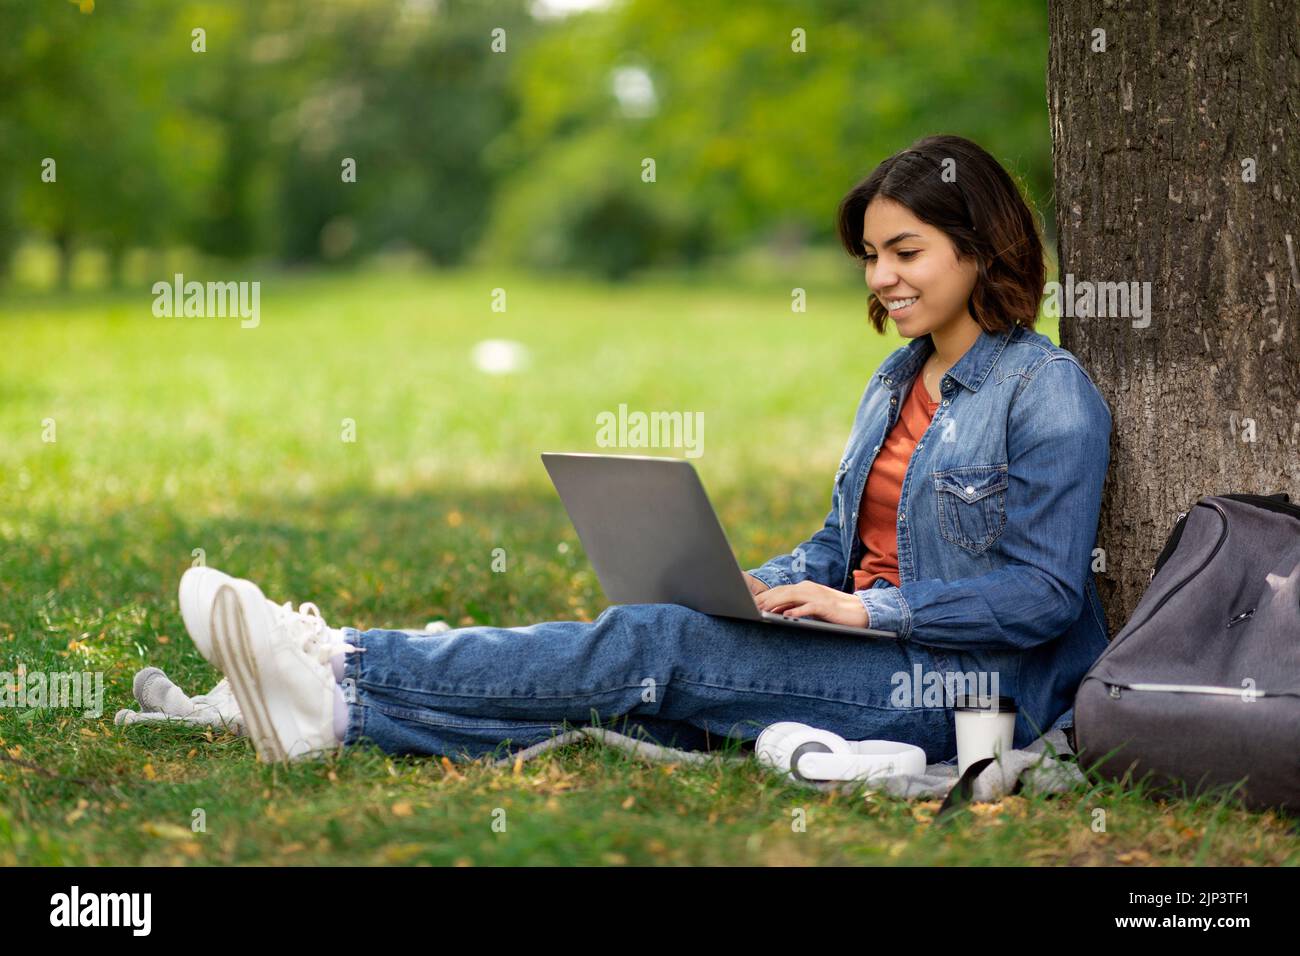 E-learning Concept. Arab Female Student With Laptop Sitting Under Tree In Park Stock Photo